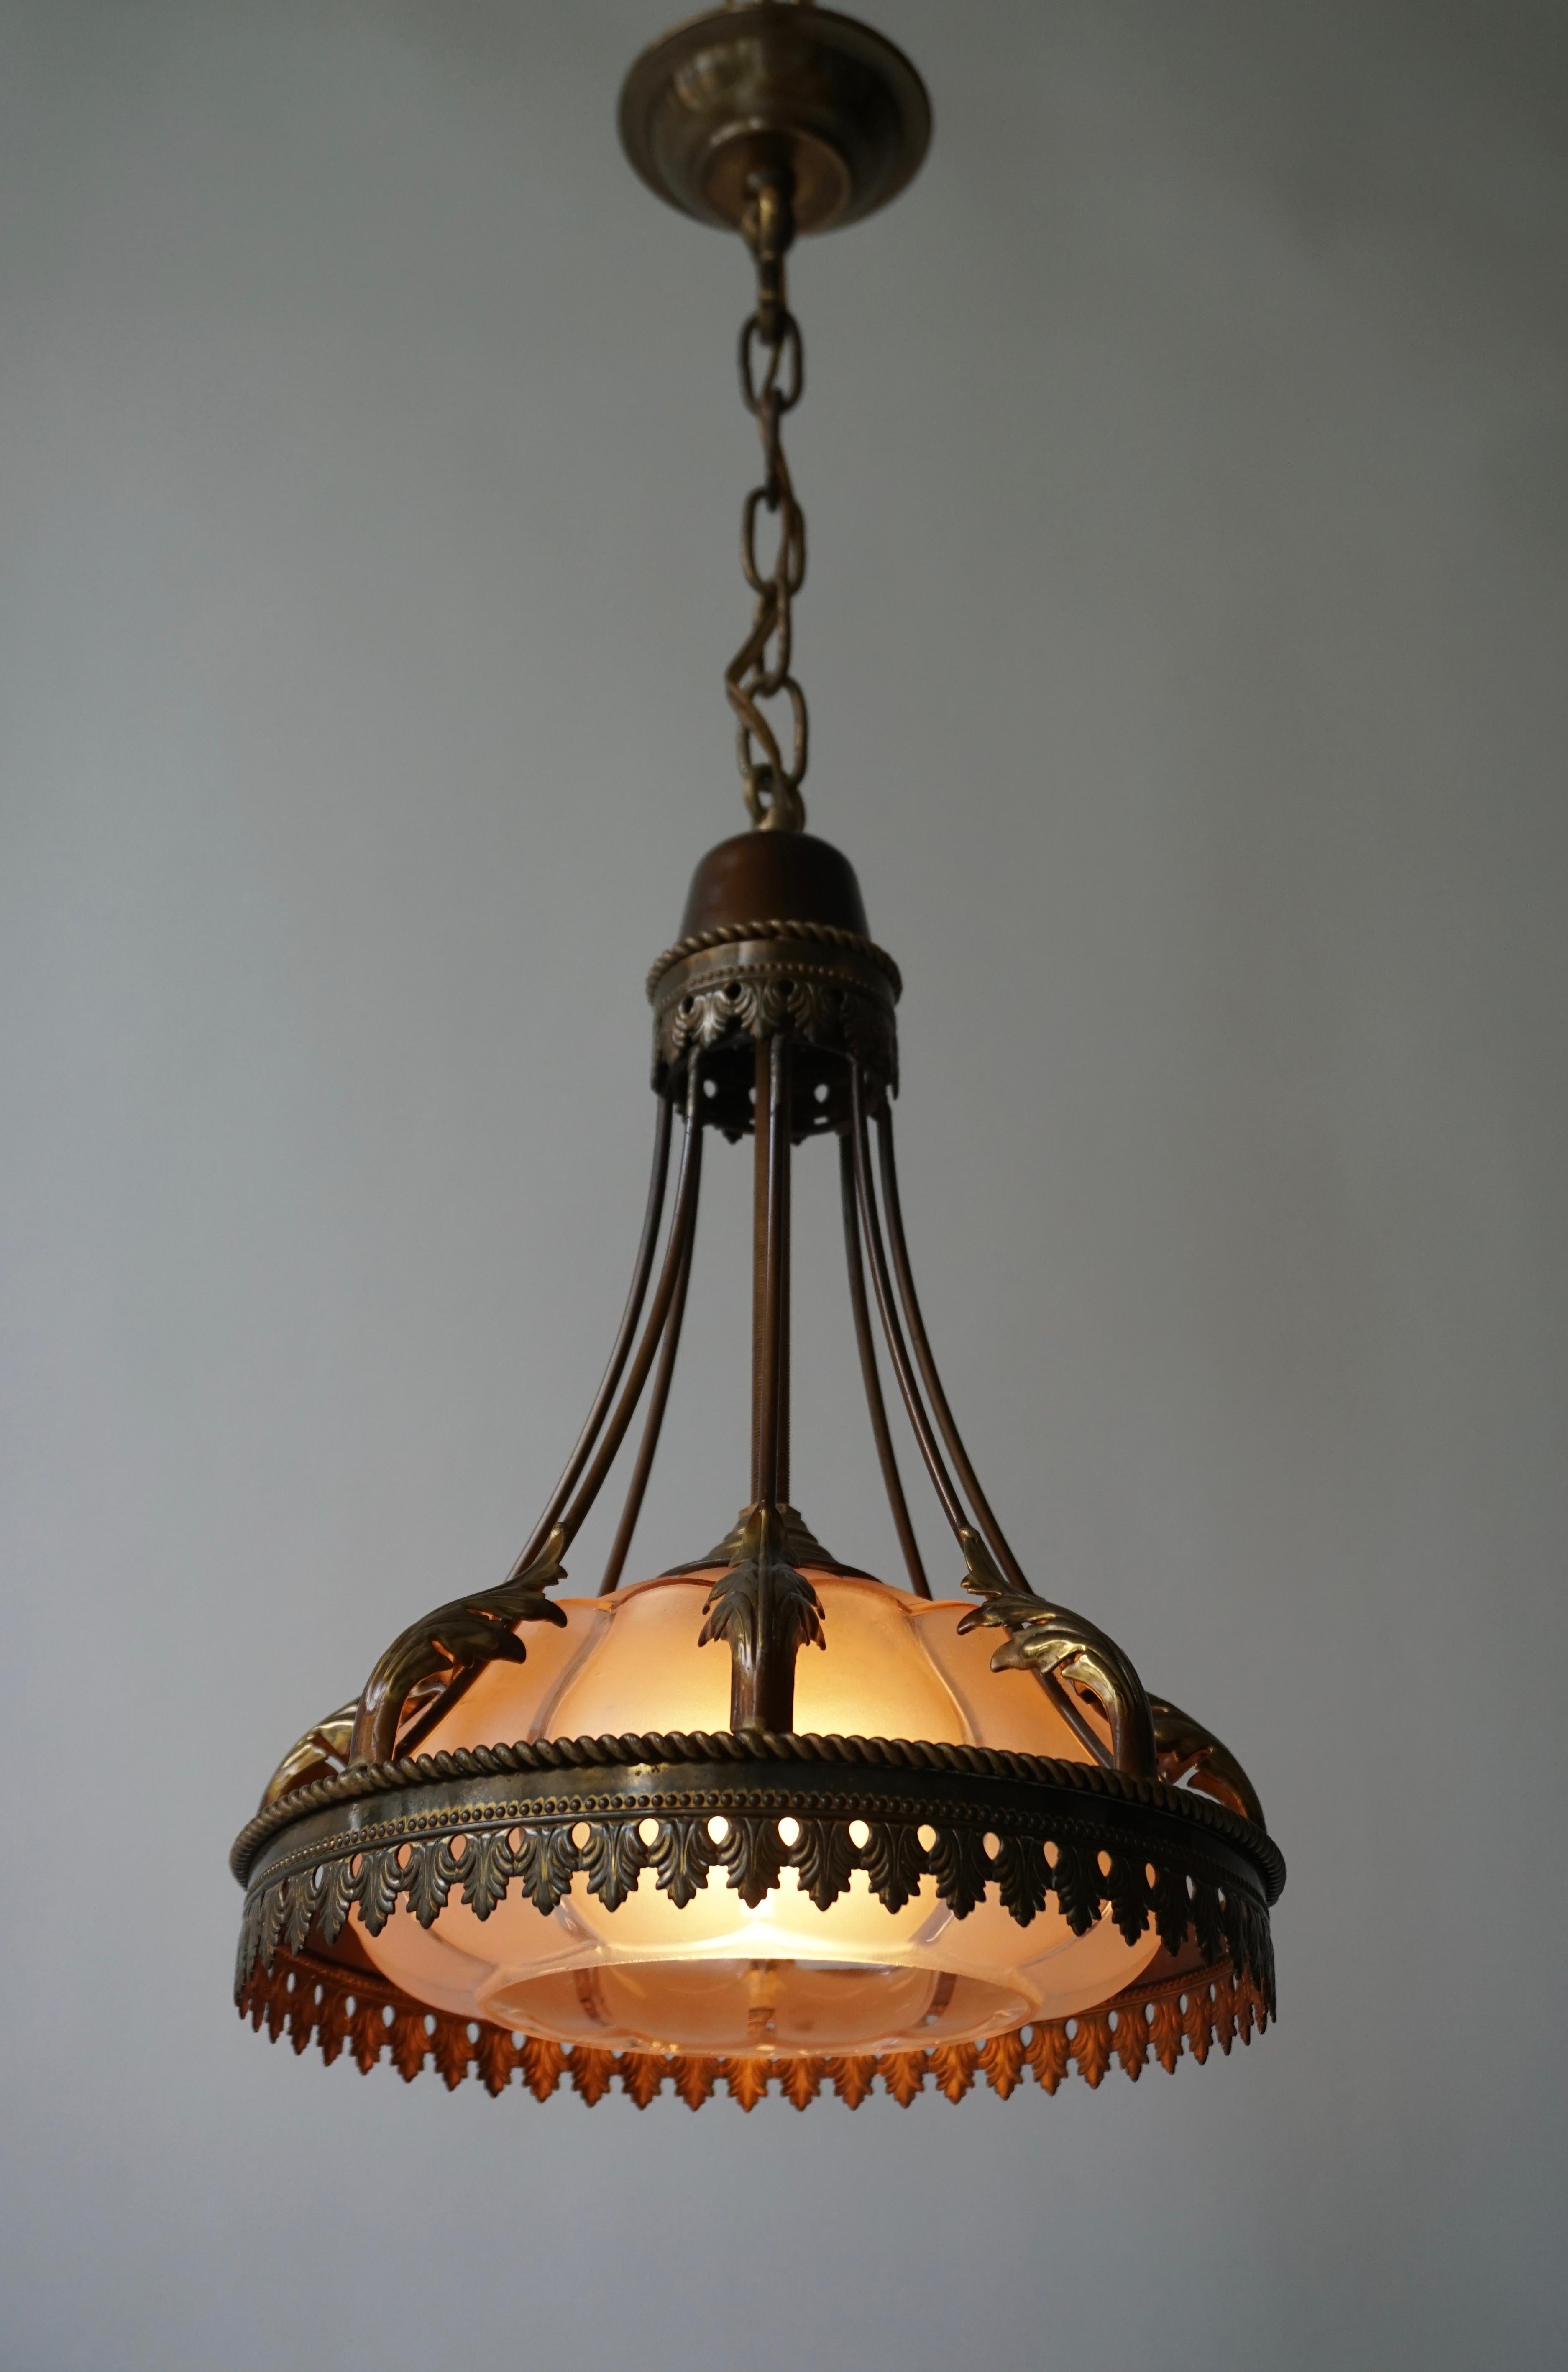 Fine brass and rose glass pendant light. France, circa 1940s-1950s.

The light requires one single E27 screw fit light bulb (60Watt max.) LED compatible.
Measures: Diameter 25 cm.
Height fixture 35 cm.
The total height is 60 cm with the chain.